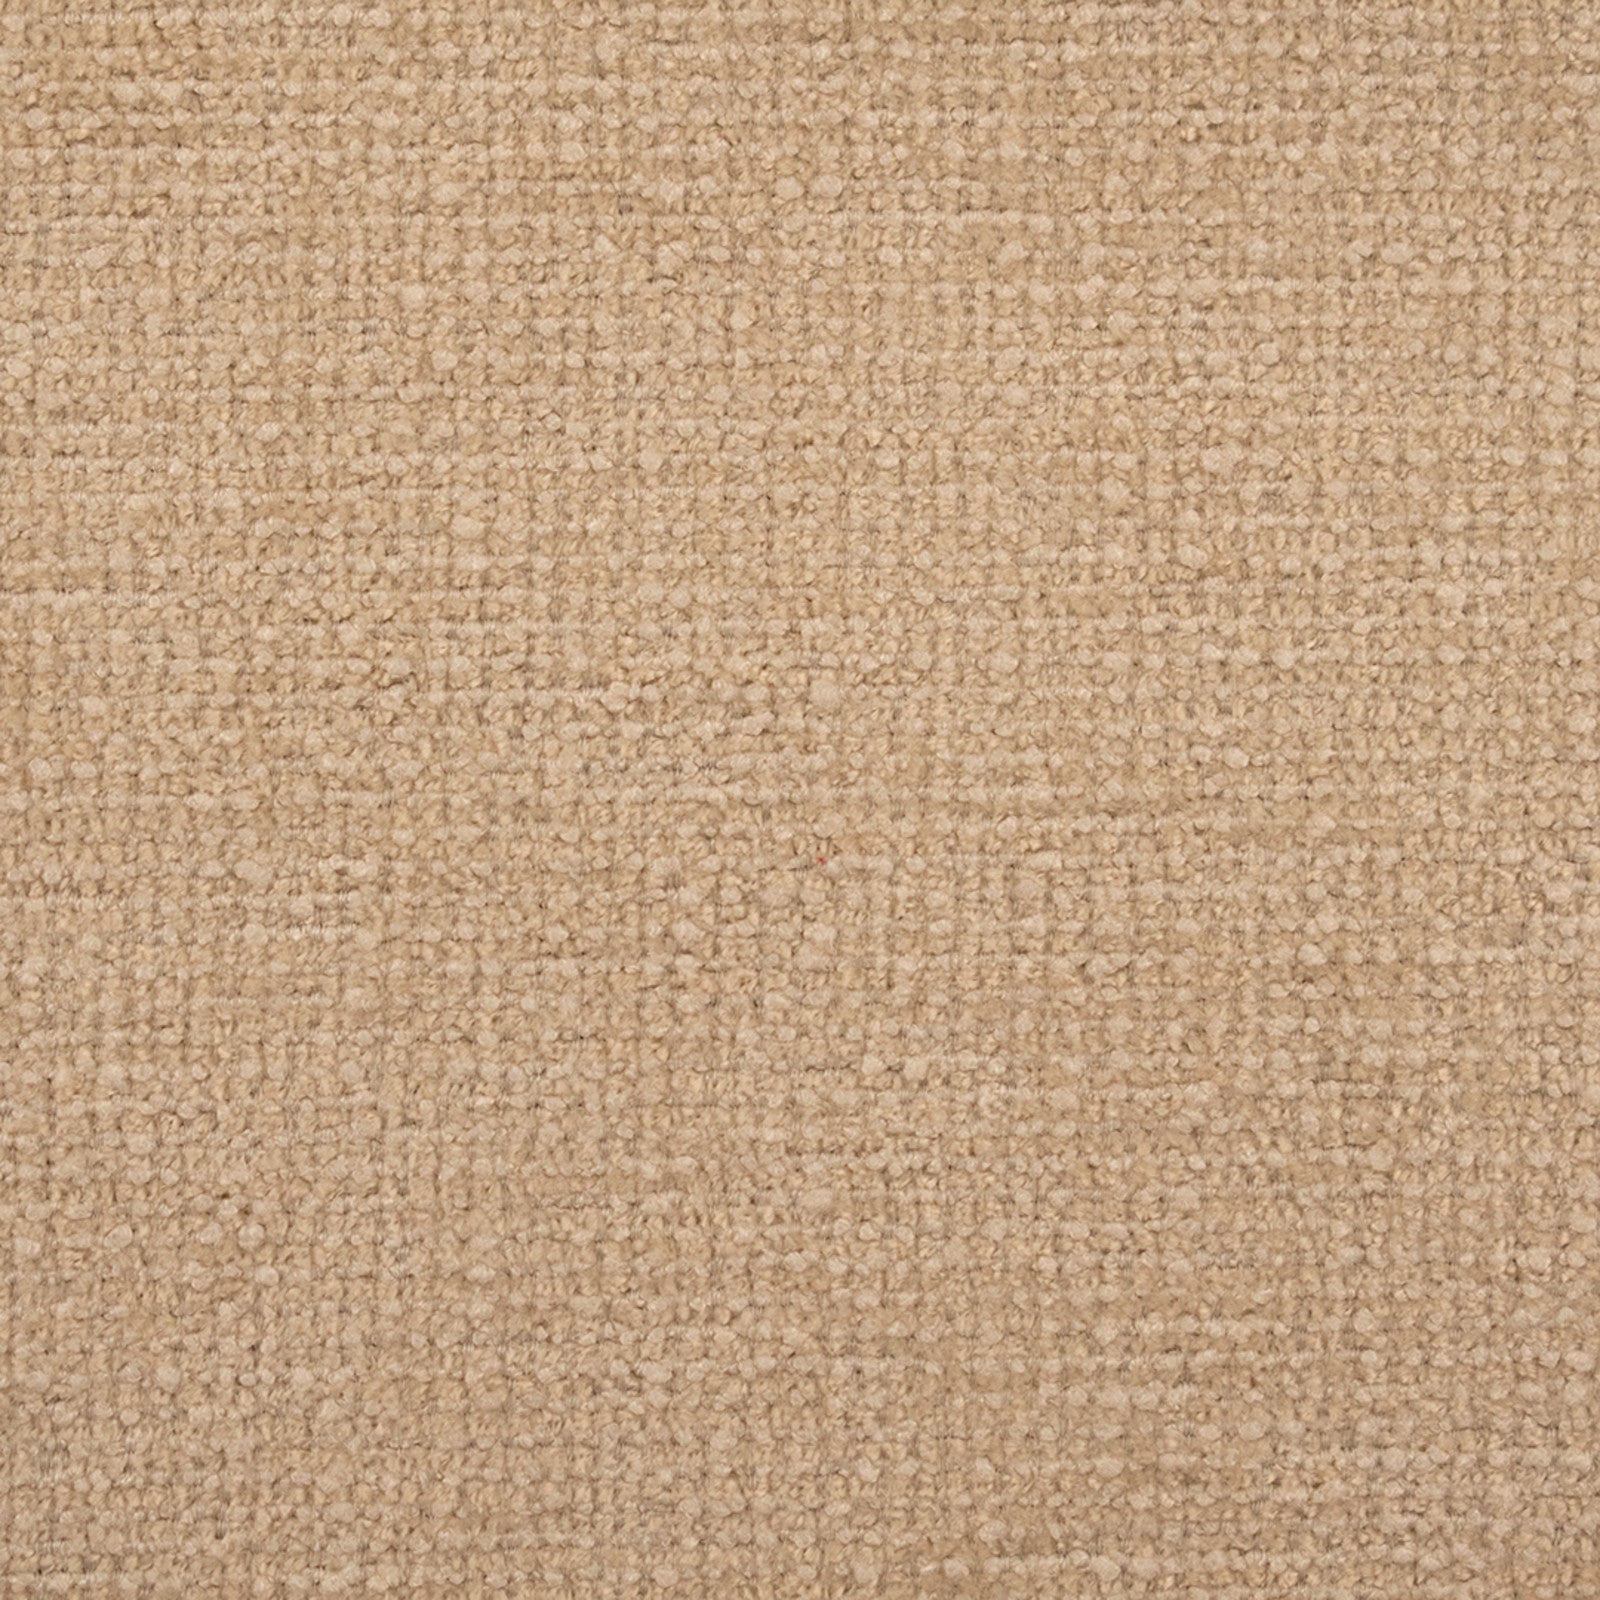 Purchase Greenhouse Fabric S5997 Natural